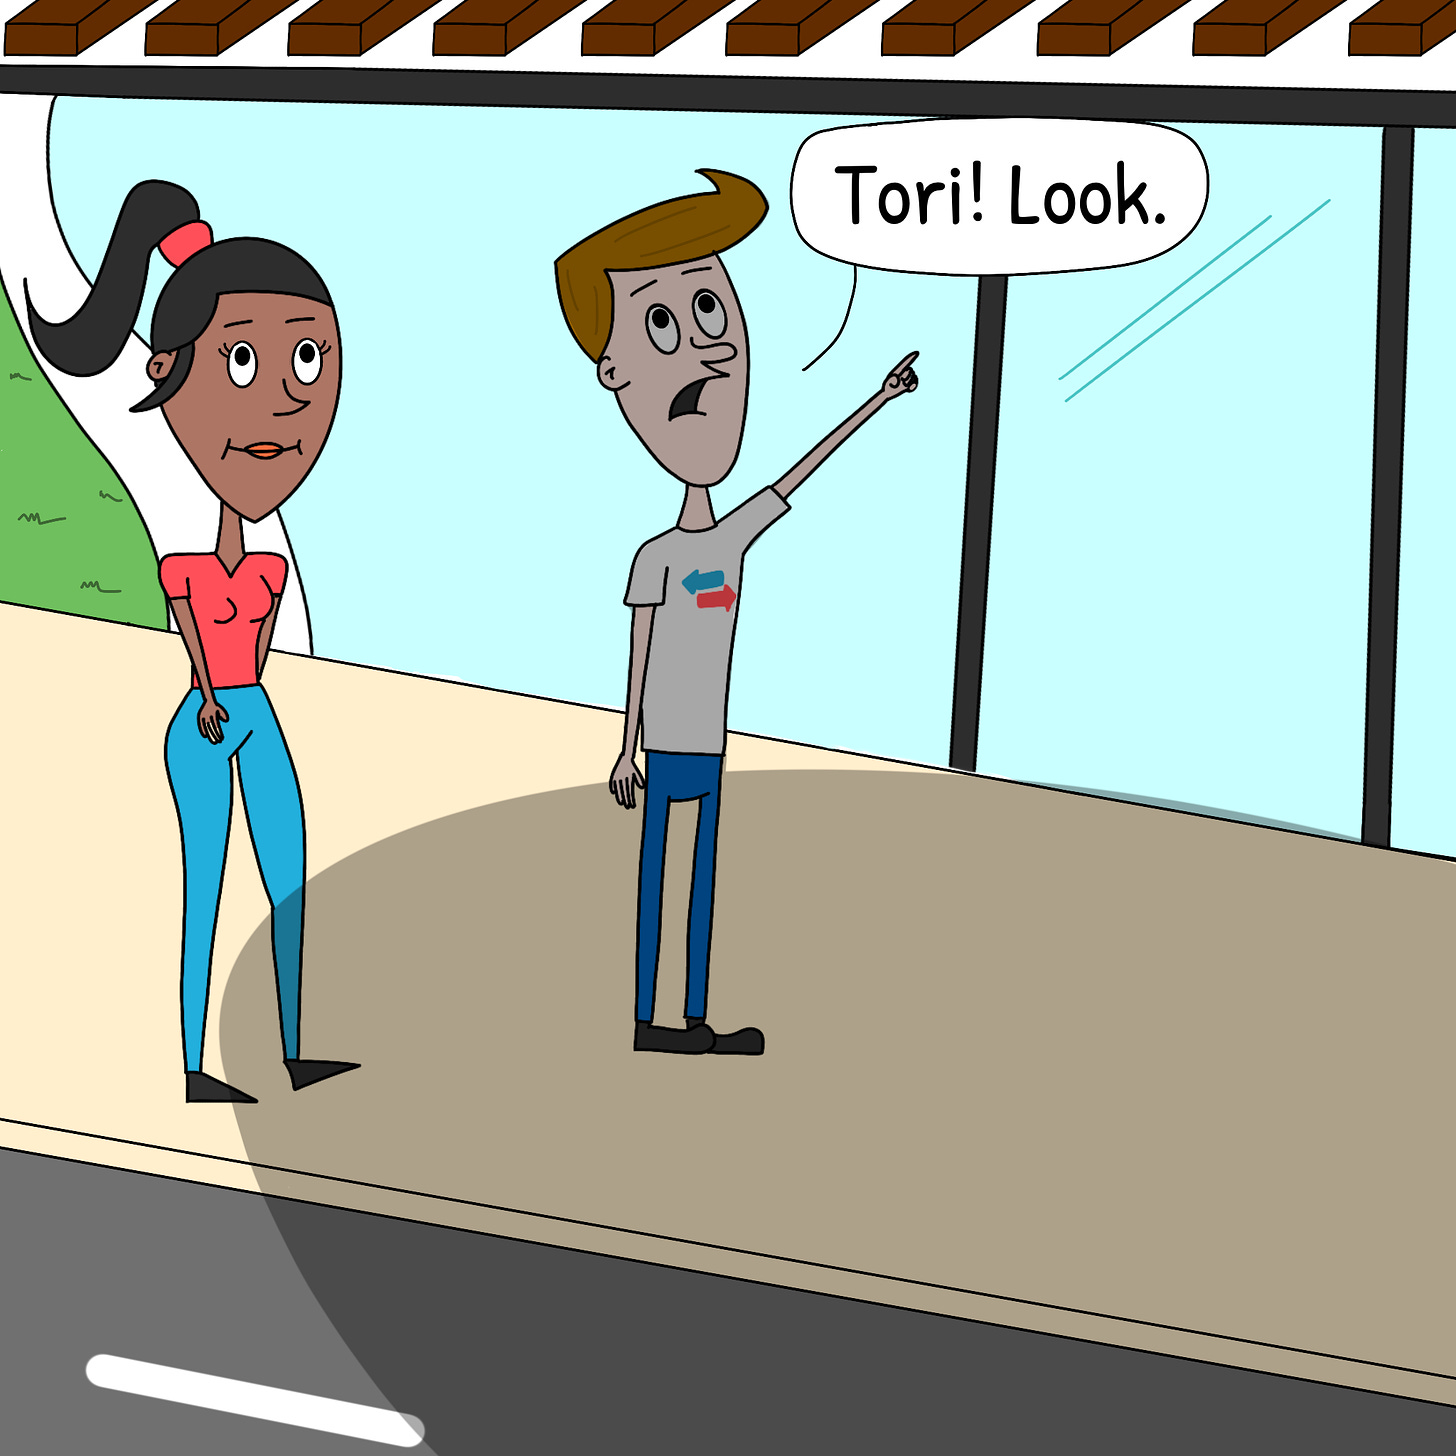 Panel 1: Vic and Tori are walking down the street. A huge silhouette of a flying object covers Vic. Vic shouts: "Tori! Look."